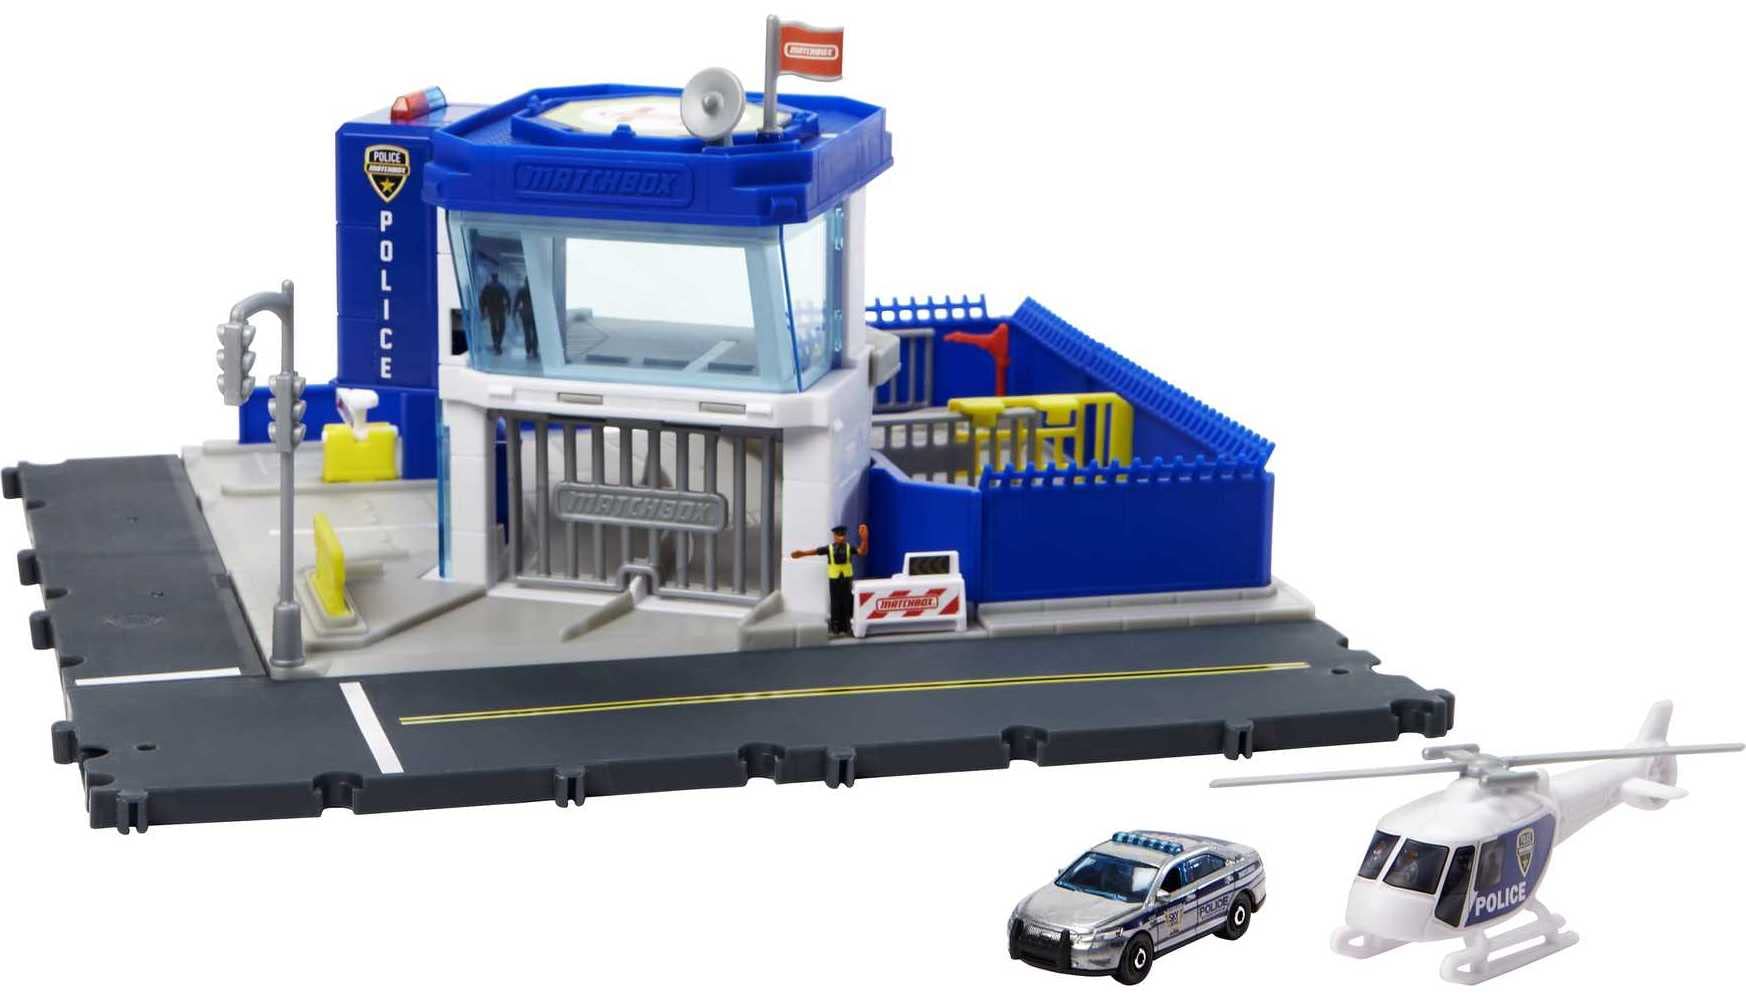 Matchbox Action Drivers Police Station Dispatch Playset $9 + Free Shipping w/ Prime or on orders $35+